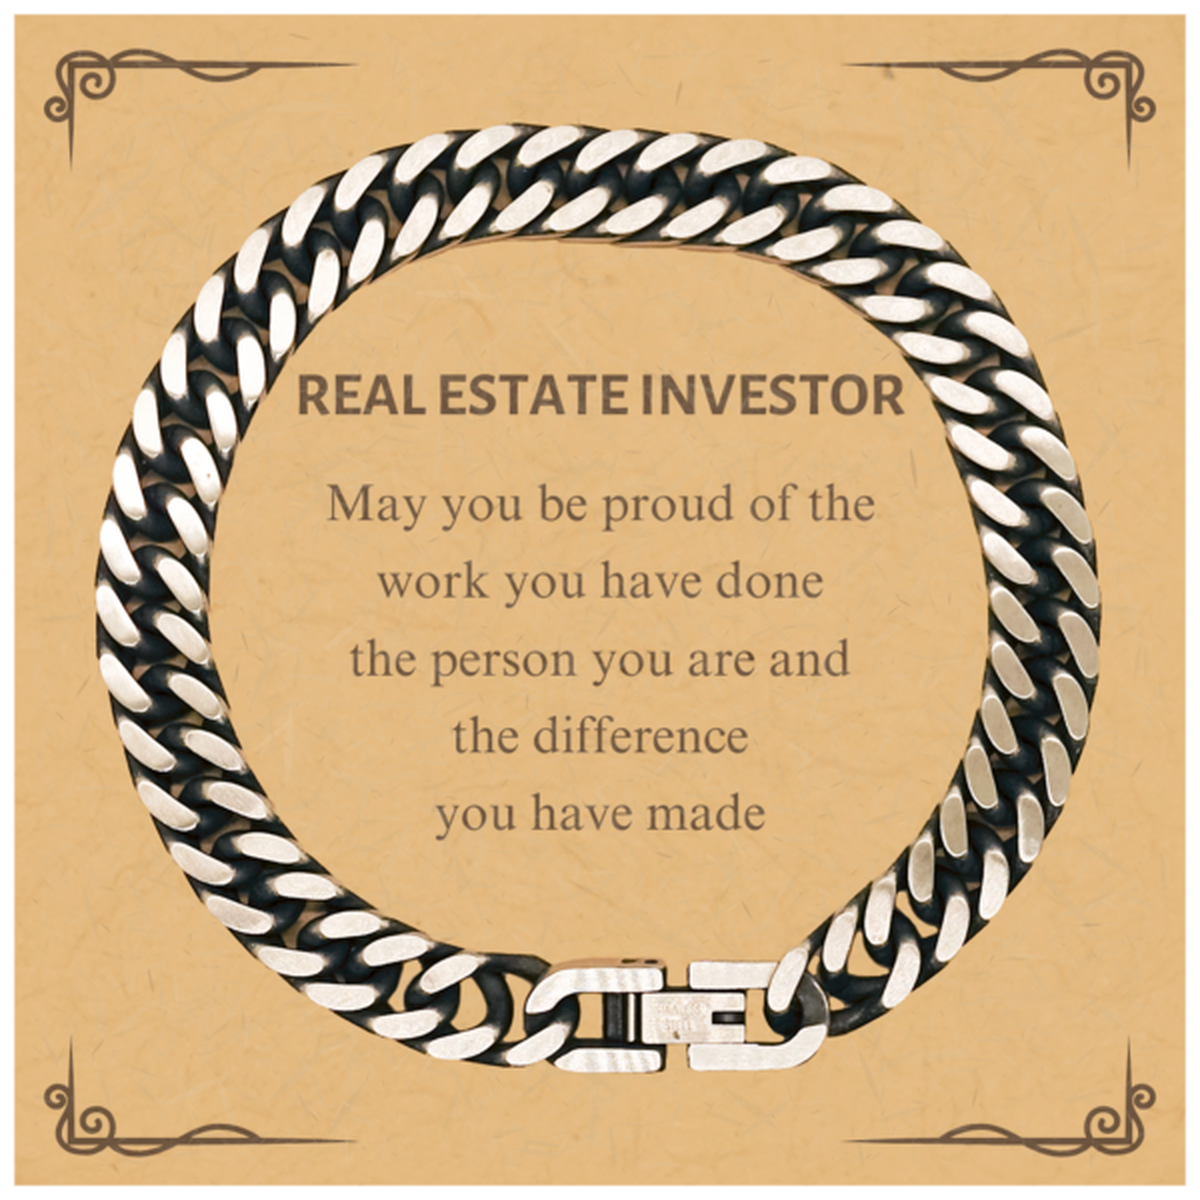 Real Estate Investor May you be proud of the work you have done, Retirement Real Estate Investor Cuban Link Chain Bracelet for Colleague Appreciation Gifts Amazing for Real Estate Investor